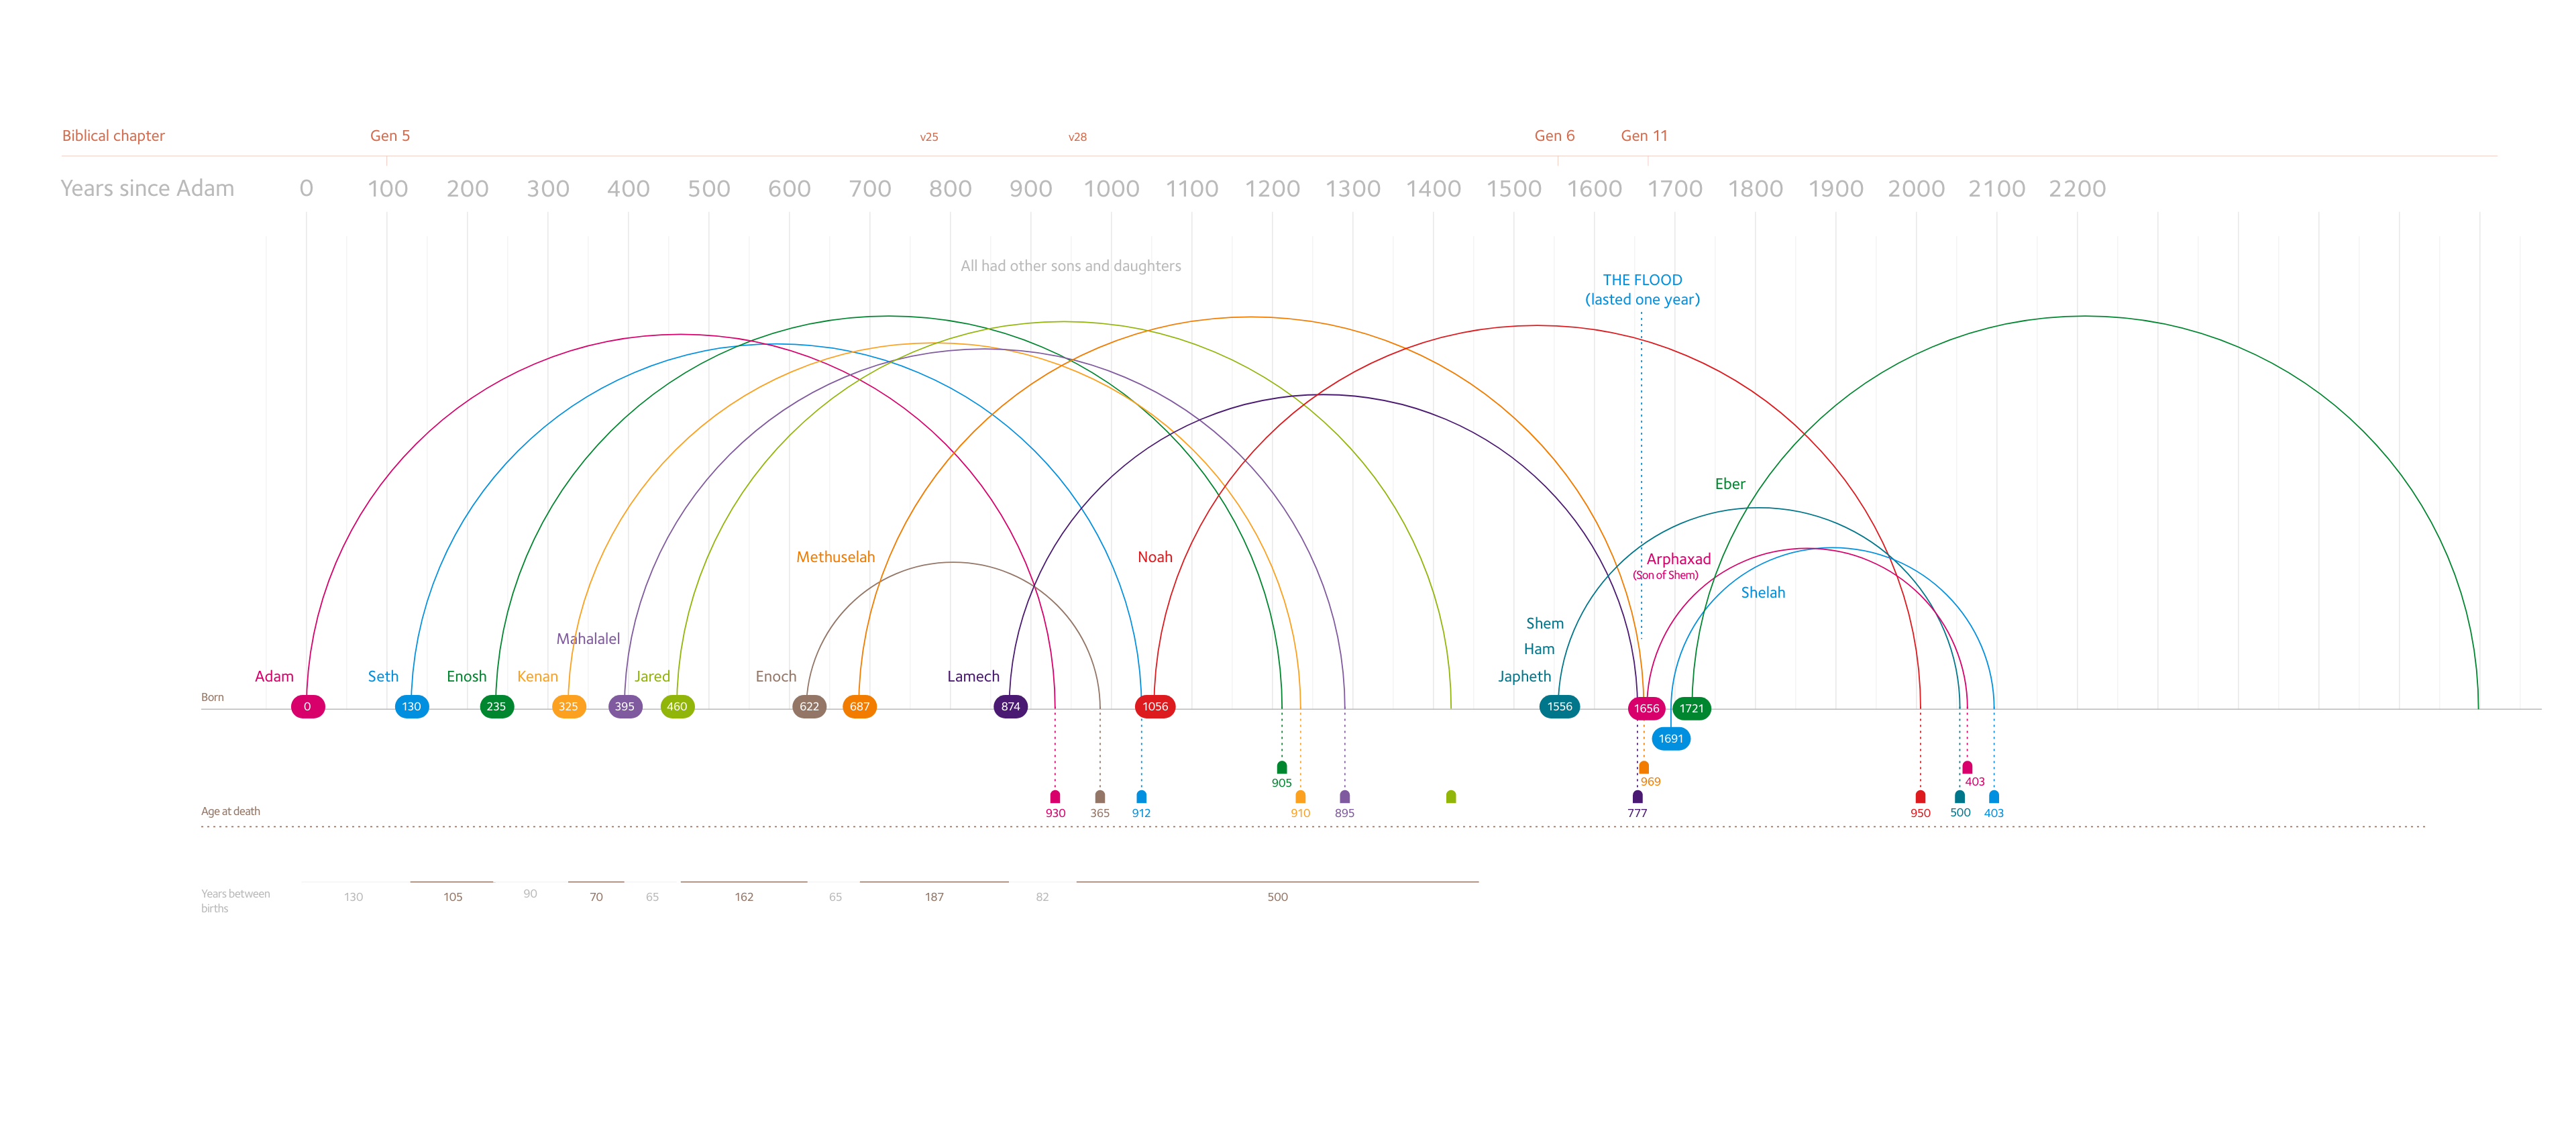 Bible timeline infographic showing births and deaths